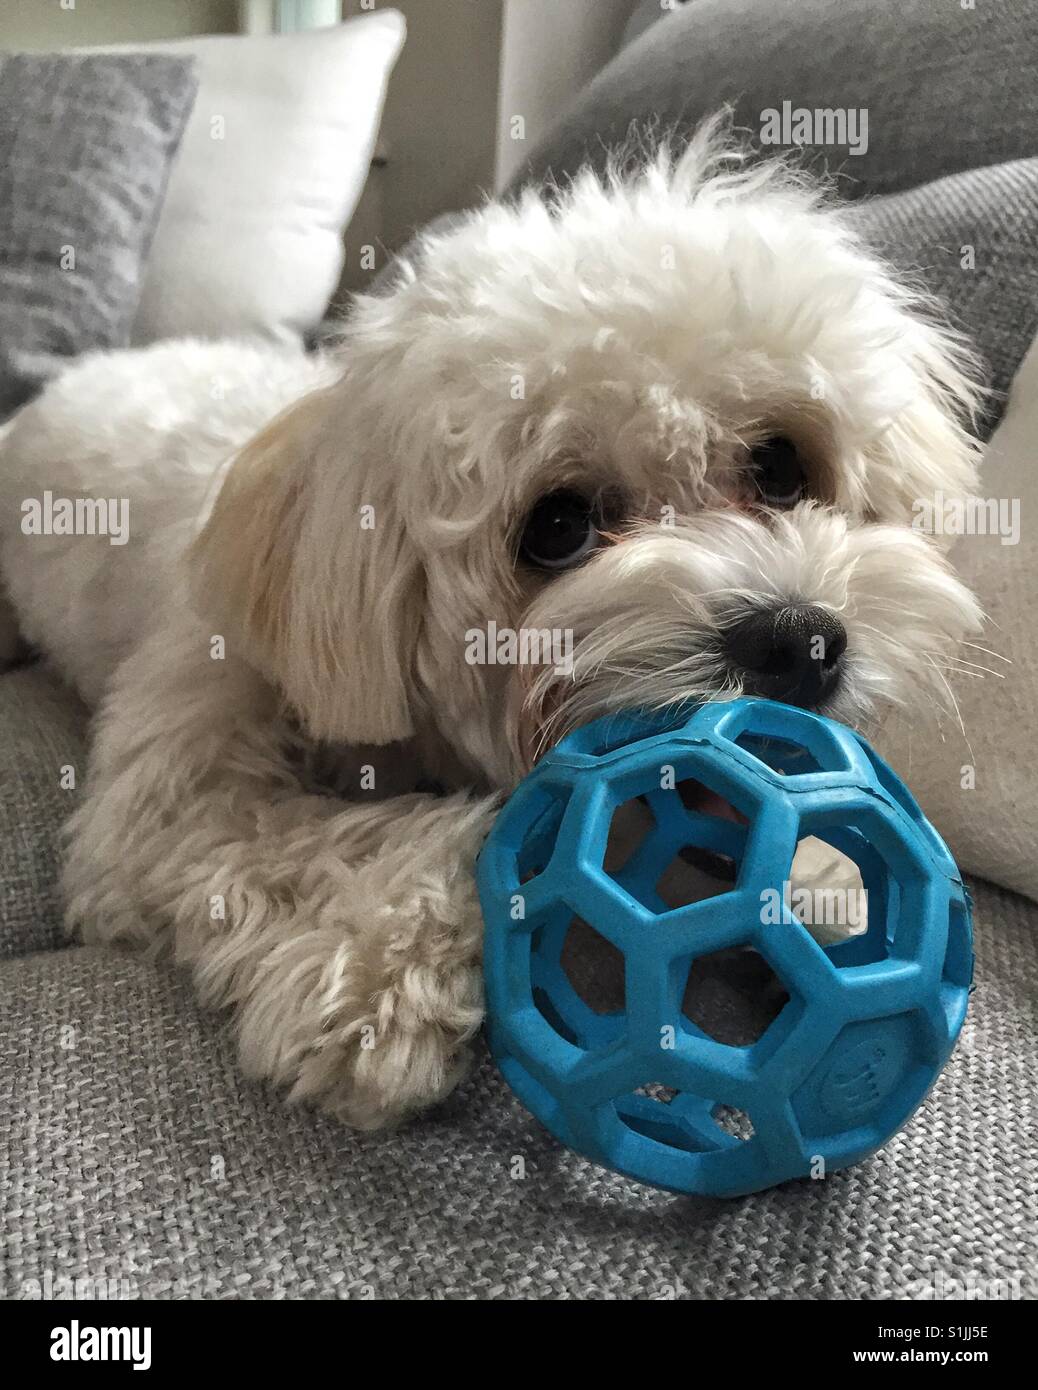 Cute fluffy white puppy playing with blue ball. Stock Photo